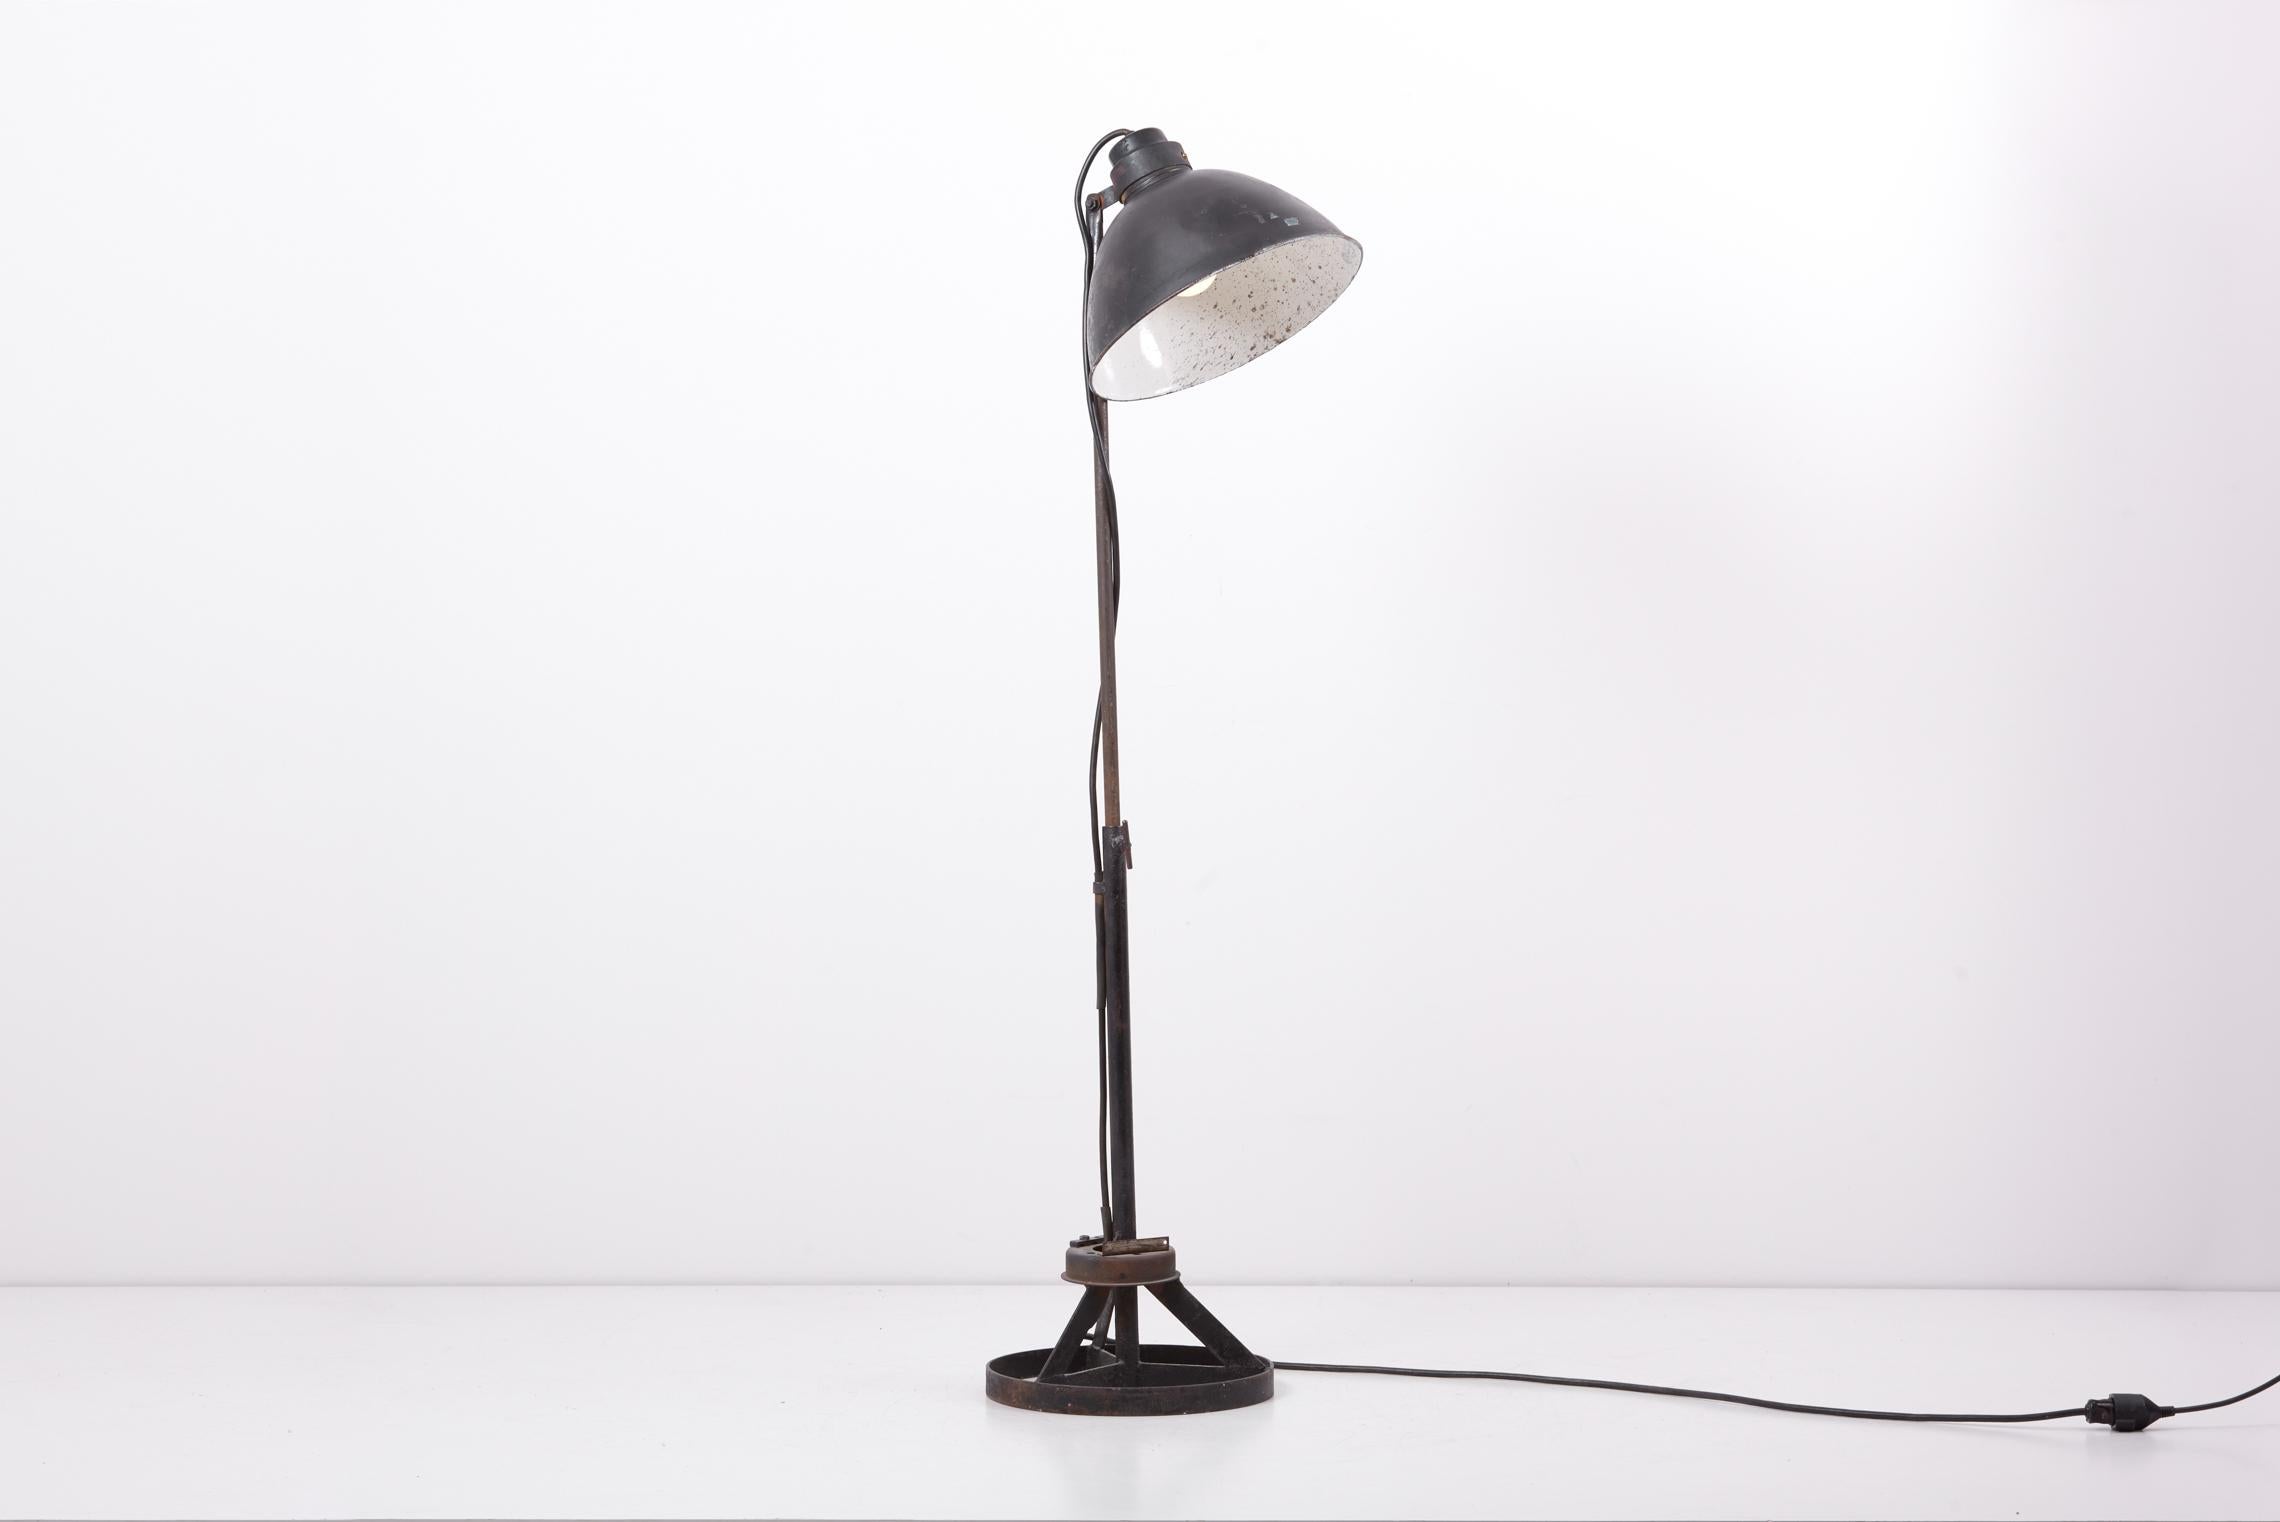 Black industrial floor lamp.
The height and the lampshade are adjustable.

1 x E27 socket

Please note: Lamp should be fitted professionally in accordance to local requirements.